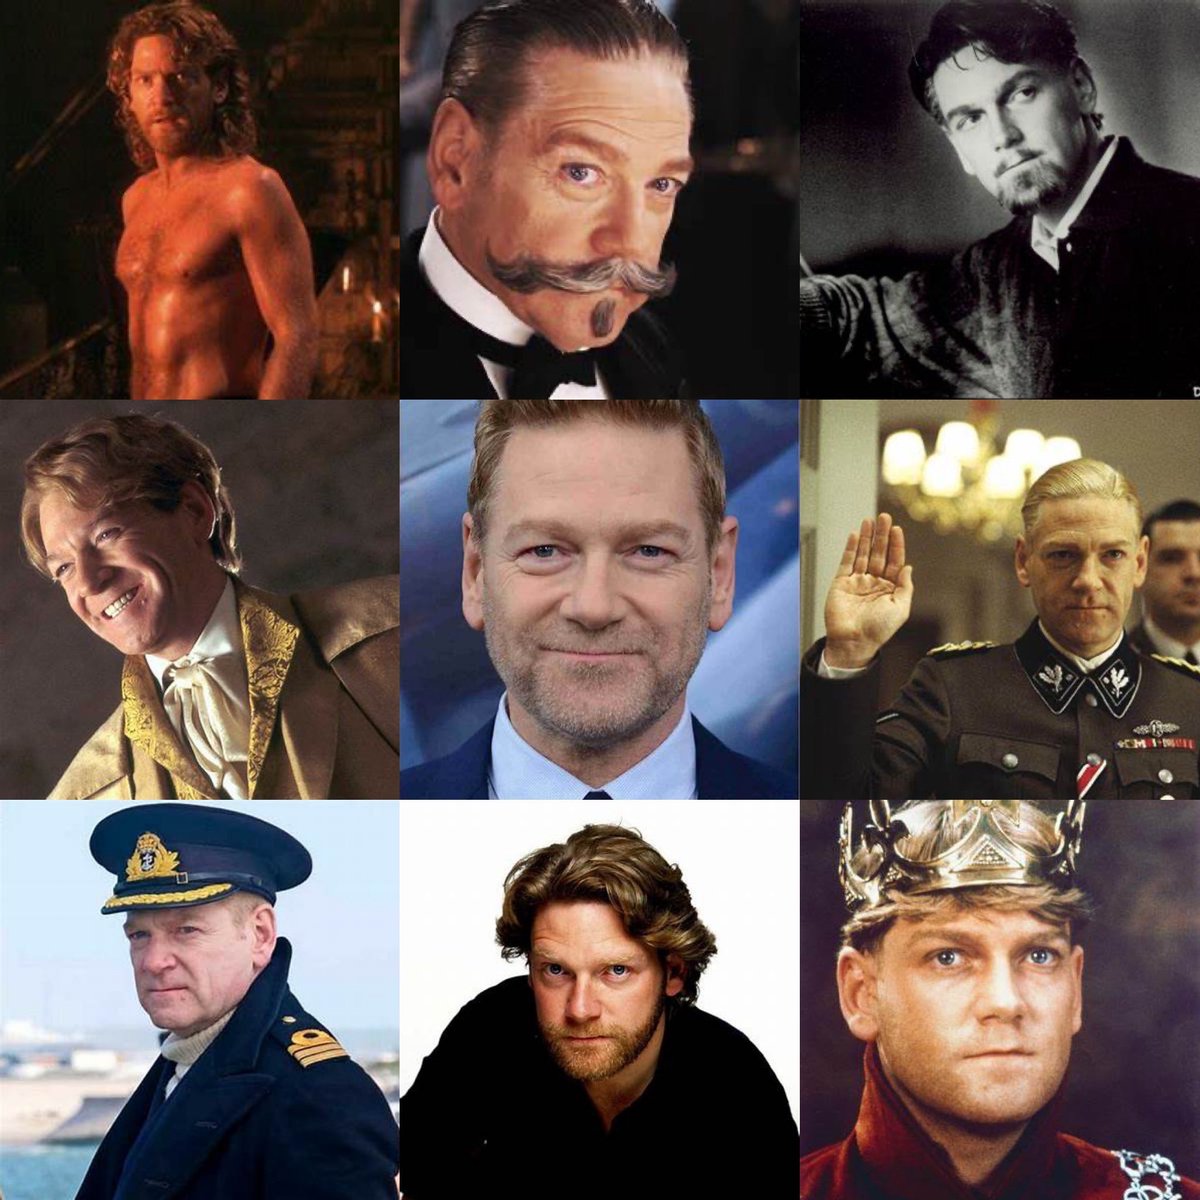 Happy Birthday Kennth Branagh! An amazing actor and a great director! Oscar noms for Henry V, Hamlet, Belfast, My Week With Marilyn. Also love Dead Again, Much Ado About Nothing, Othello, Dunkirk, Celebrity, Oppenheimer, the Hercule Poirot films. #kennethbranagh